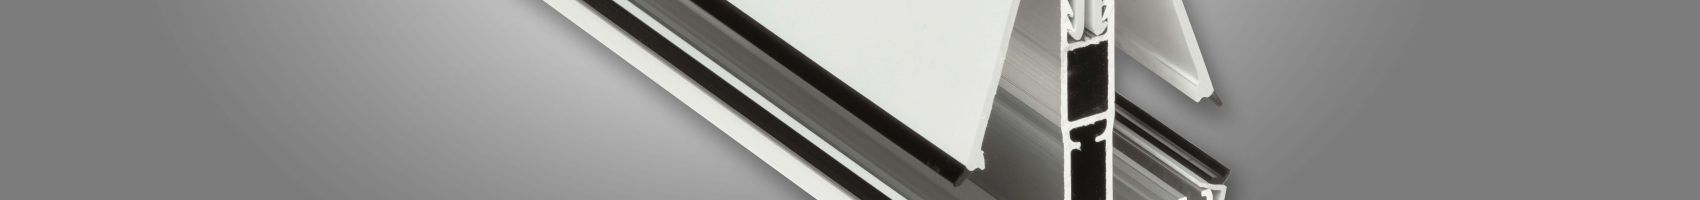 4m White Eaves Beam To Suit Self Support Glazing Bars 